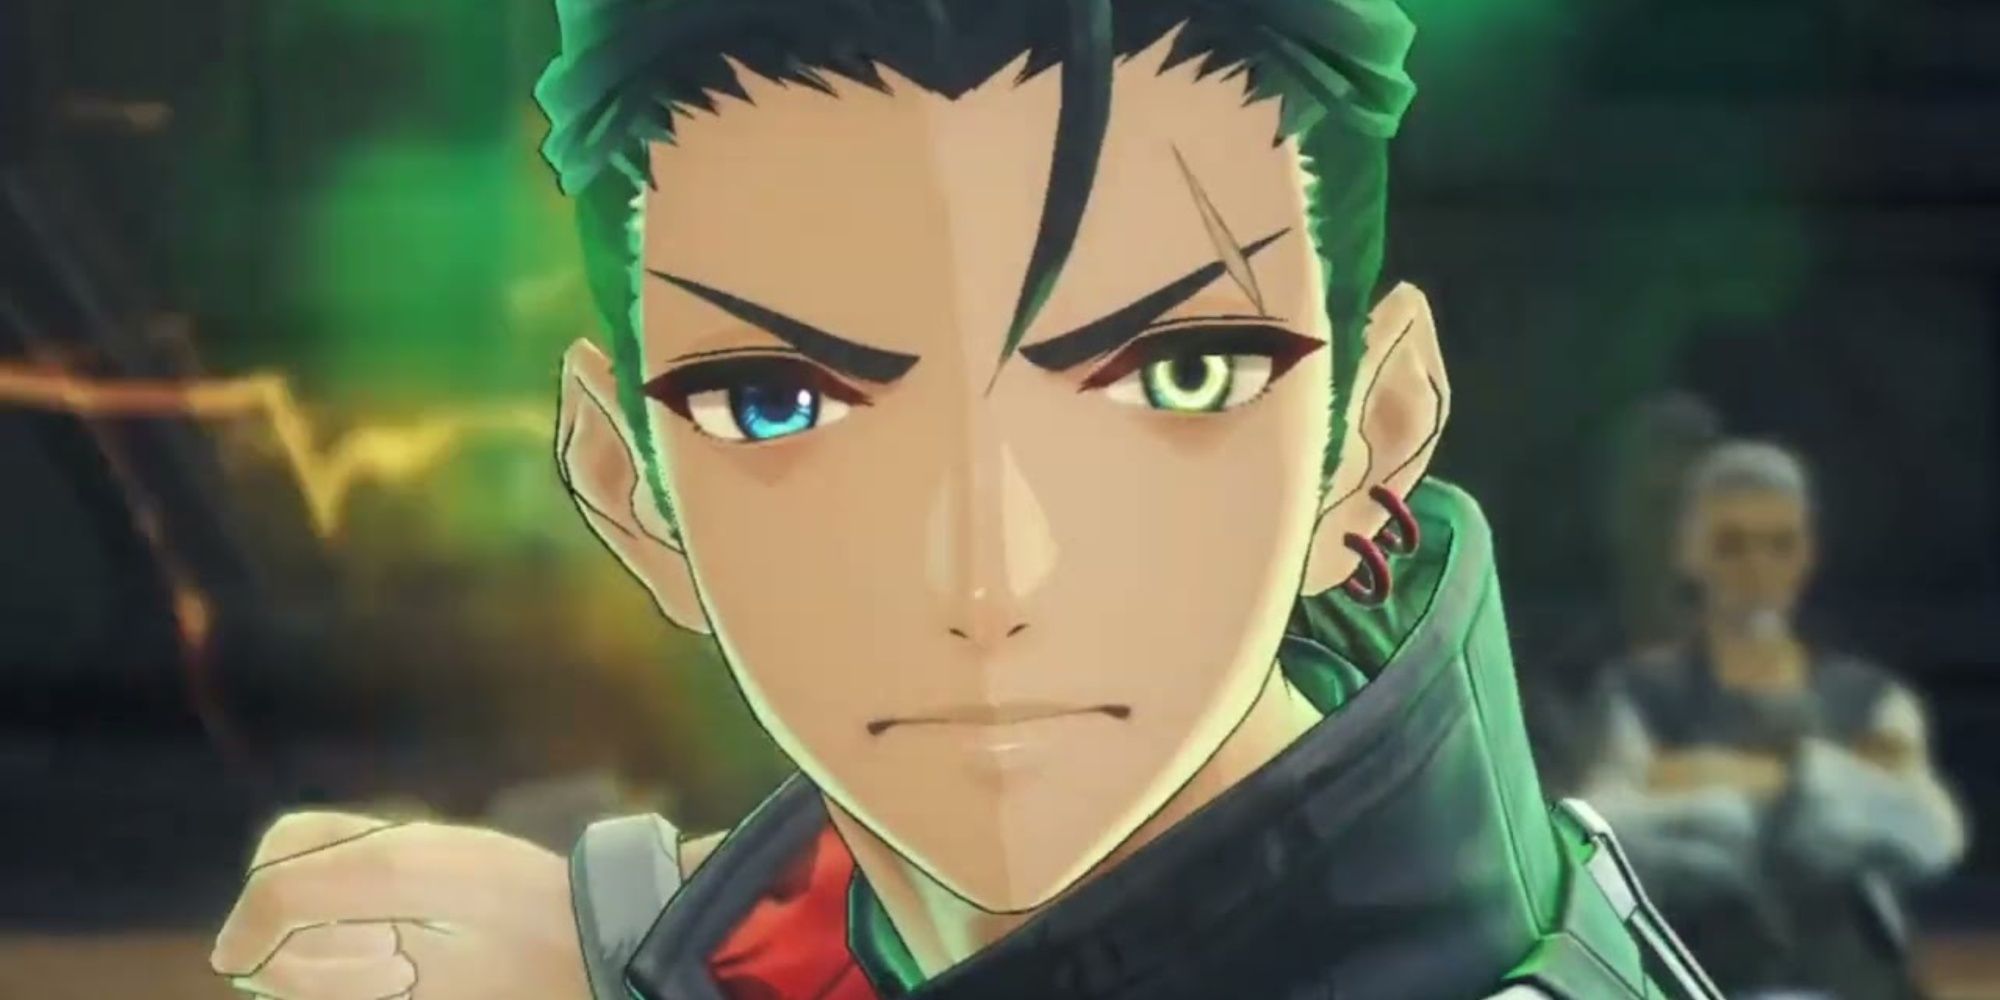 Matthew Surrounded By A Green Aura With A Glowing Left Eye in Xenoblade Chronicles 3: Future Redeemed.